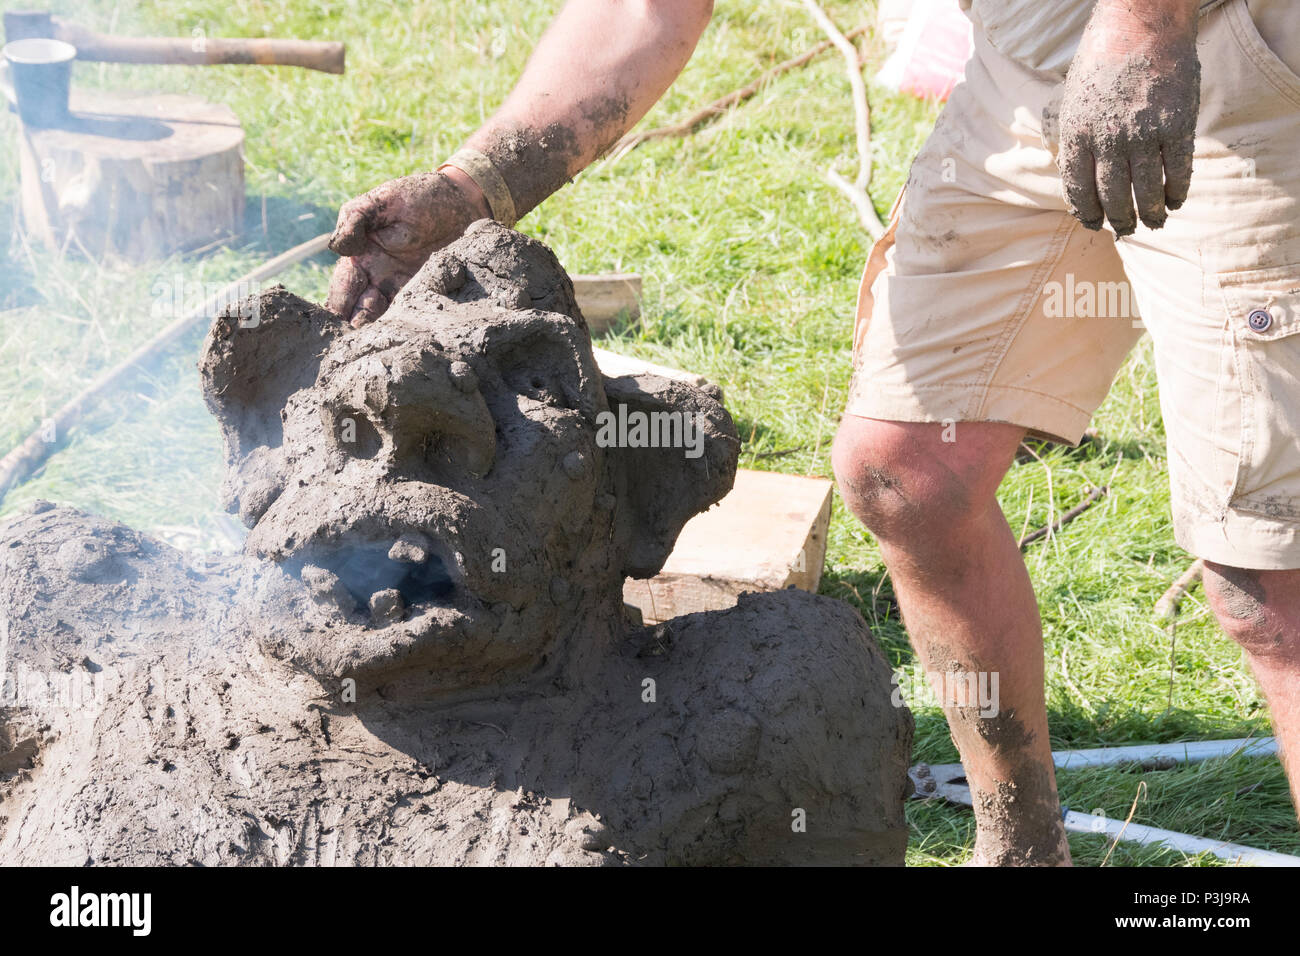 Chepstow, Wales – Aug 14: smoke comes from the mouth of a troll earth oven drying through first bake on 14 Aug 2016 at The Green Gathering Festival Stock Photo